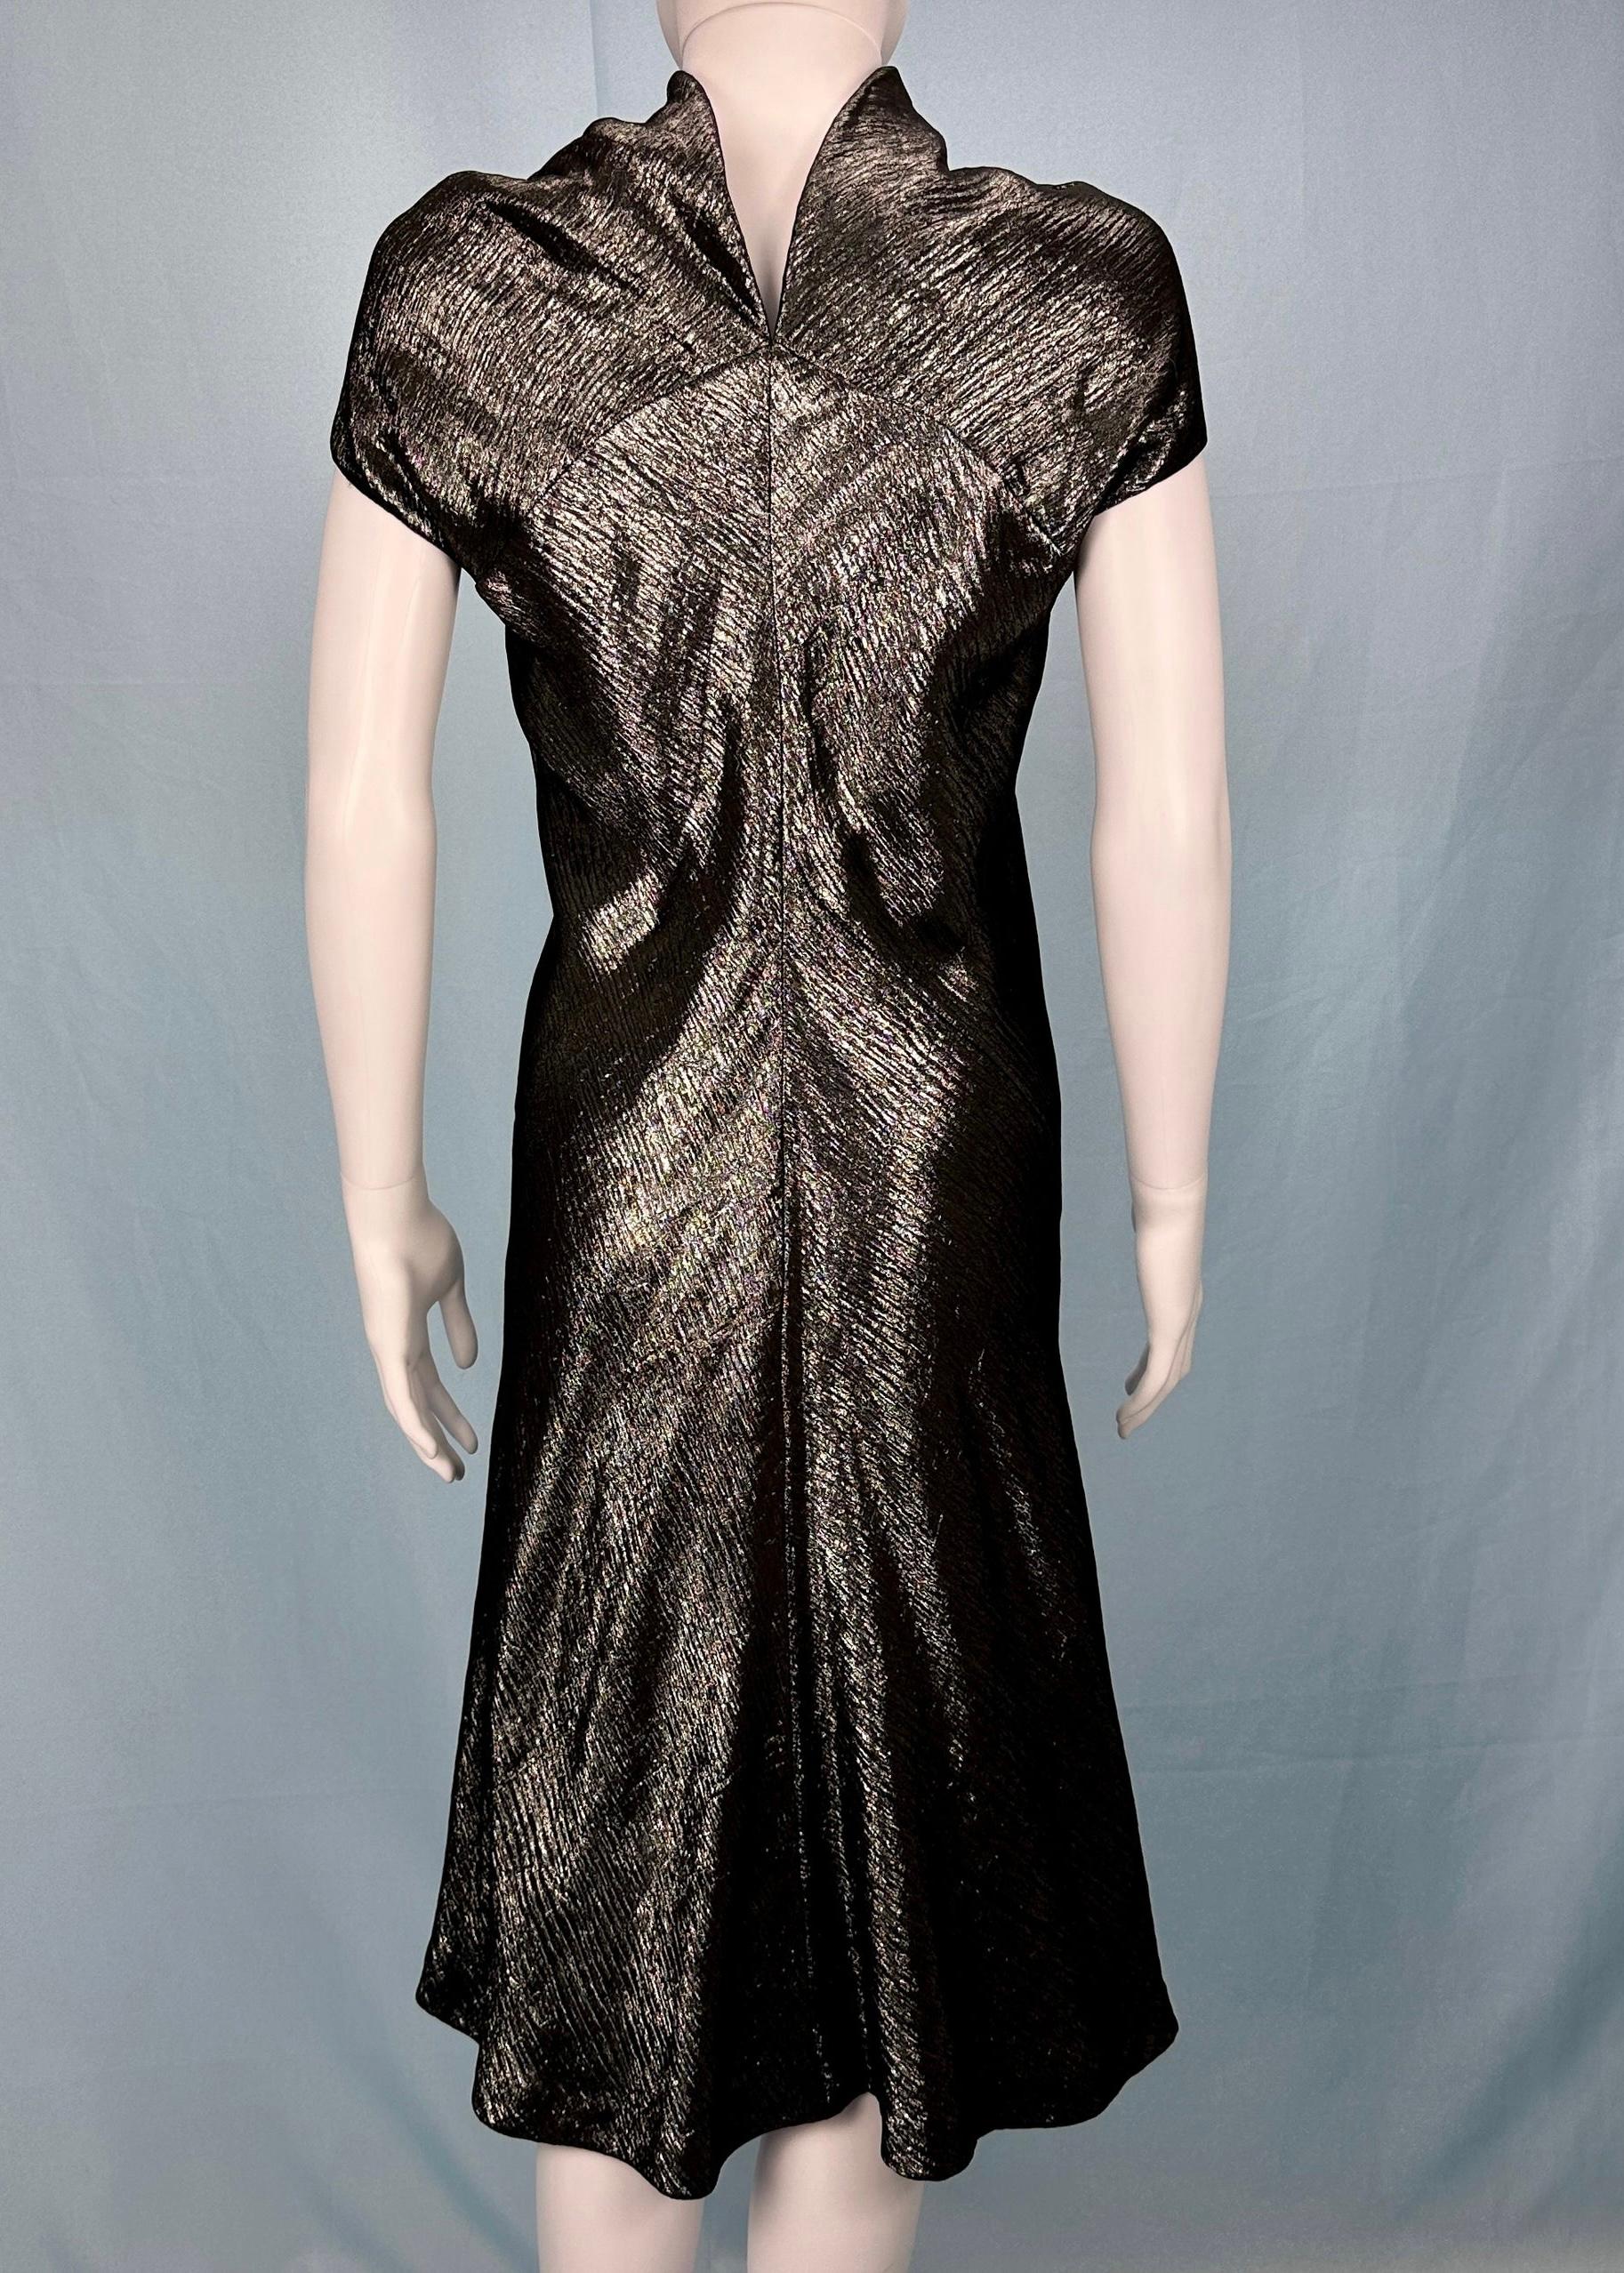 Hermes by Jean Paul Gaultier Fall 2007 Metallic Dress In New Condition For Sale In Hertfordshire, GB